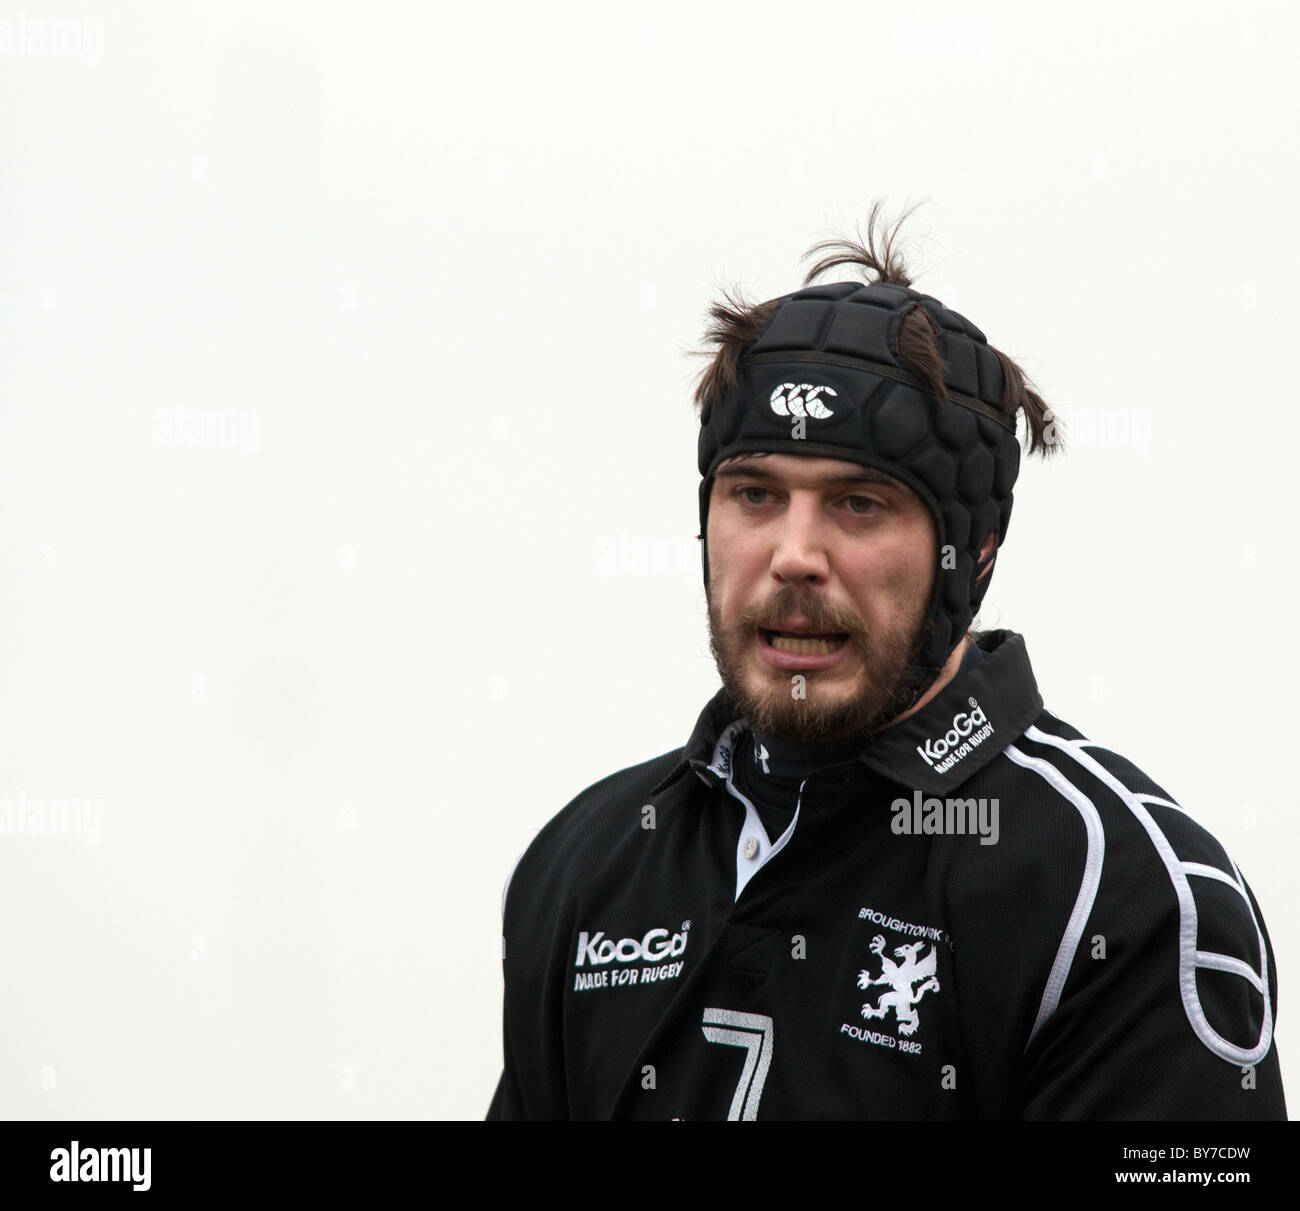 rugby player looking determined Stock Photo